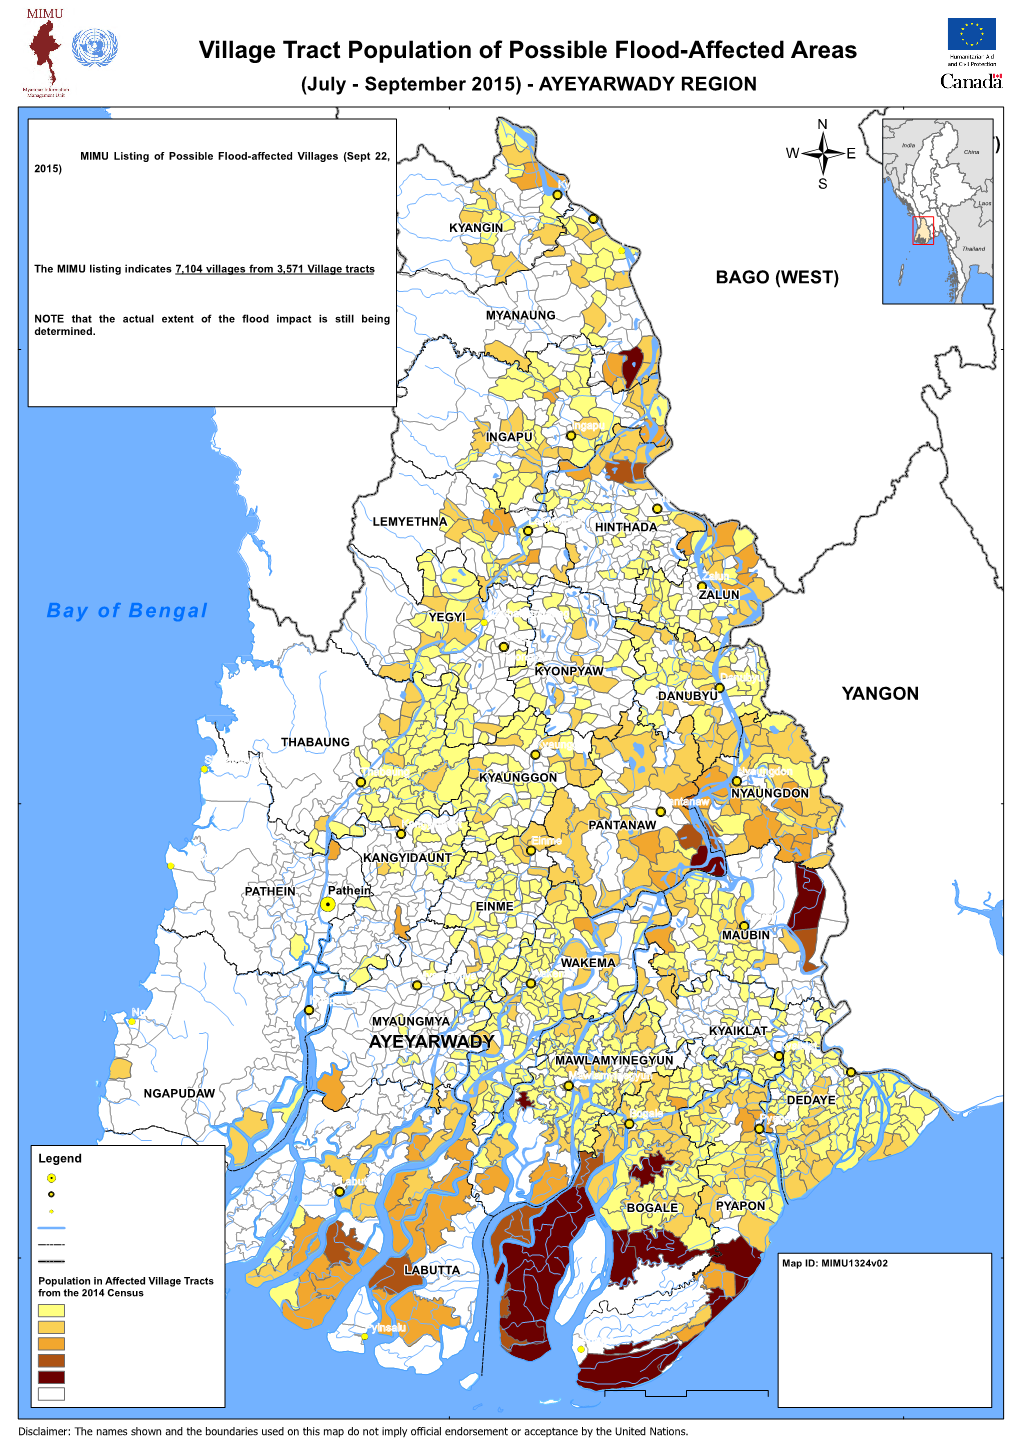 Village Tract Population of Possible Flood-Affected Areas (July - September 2015) - AYEYARWADY REGION